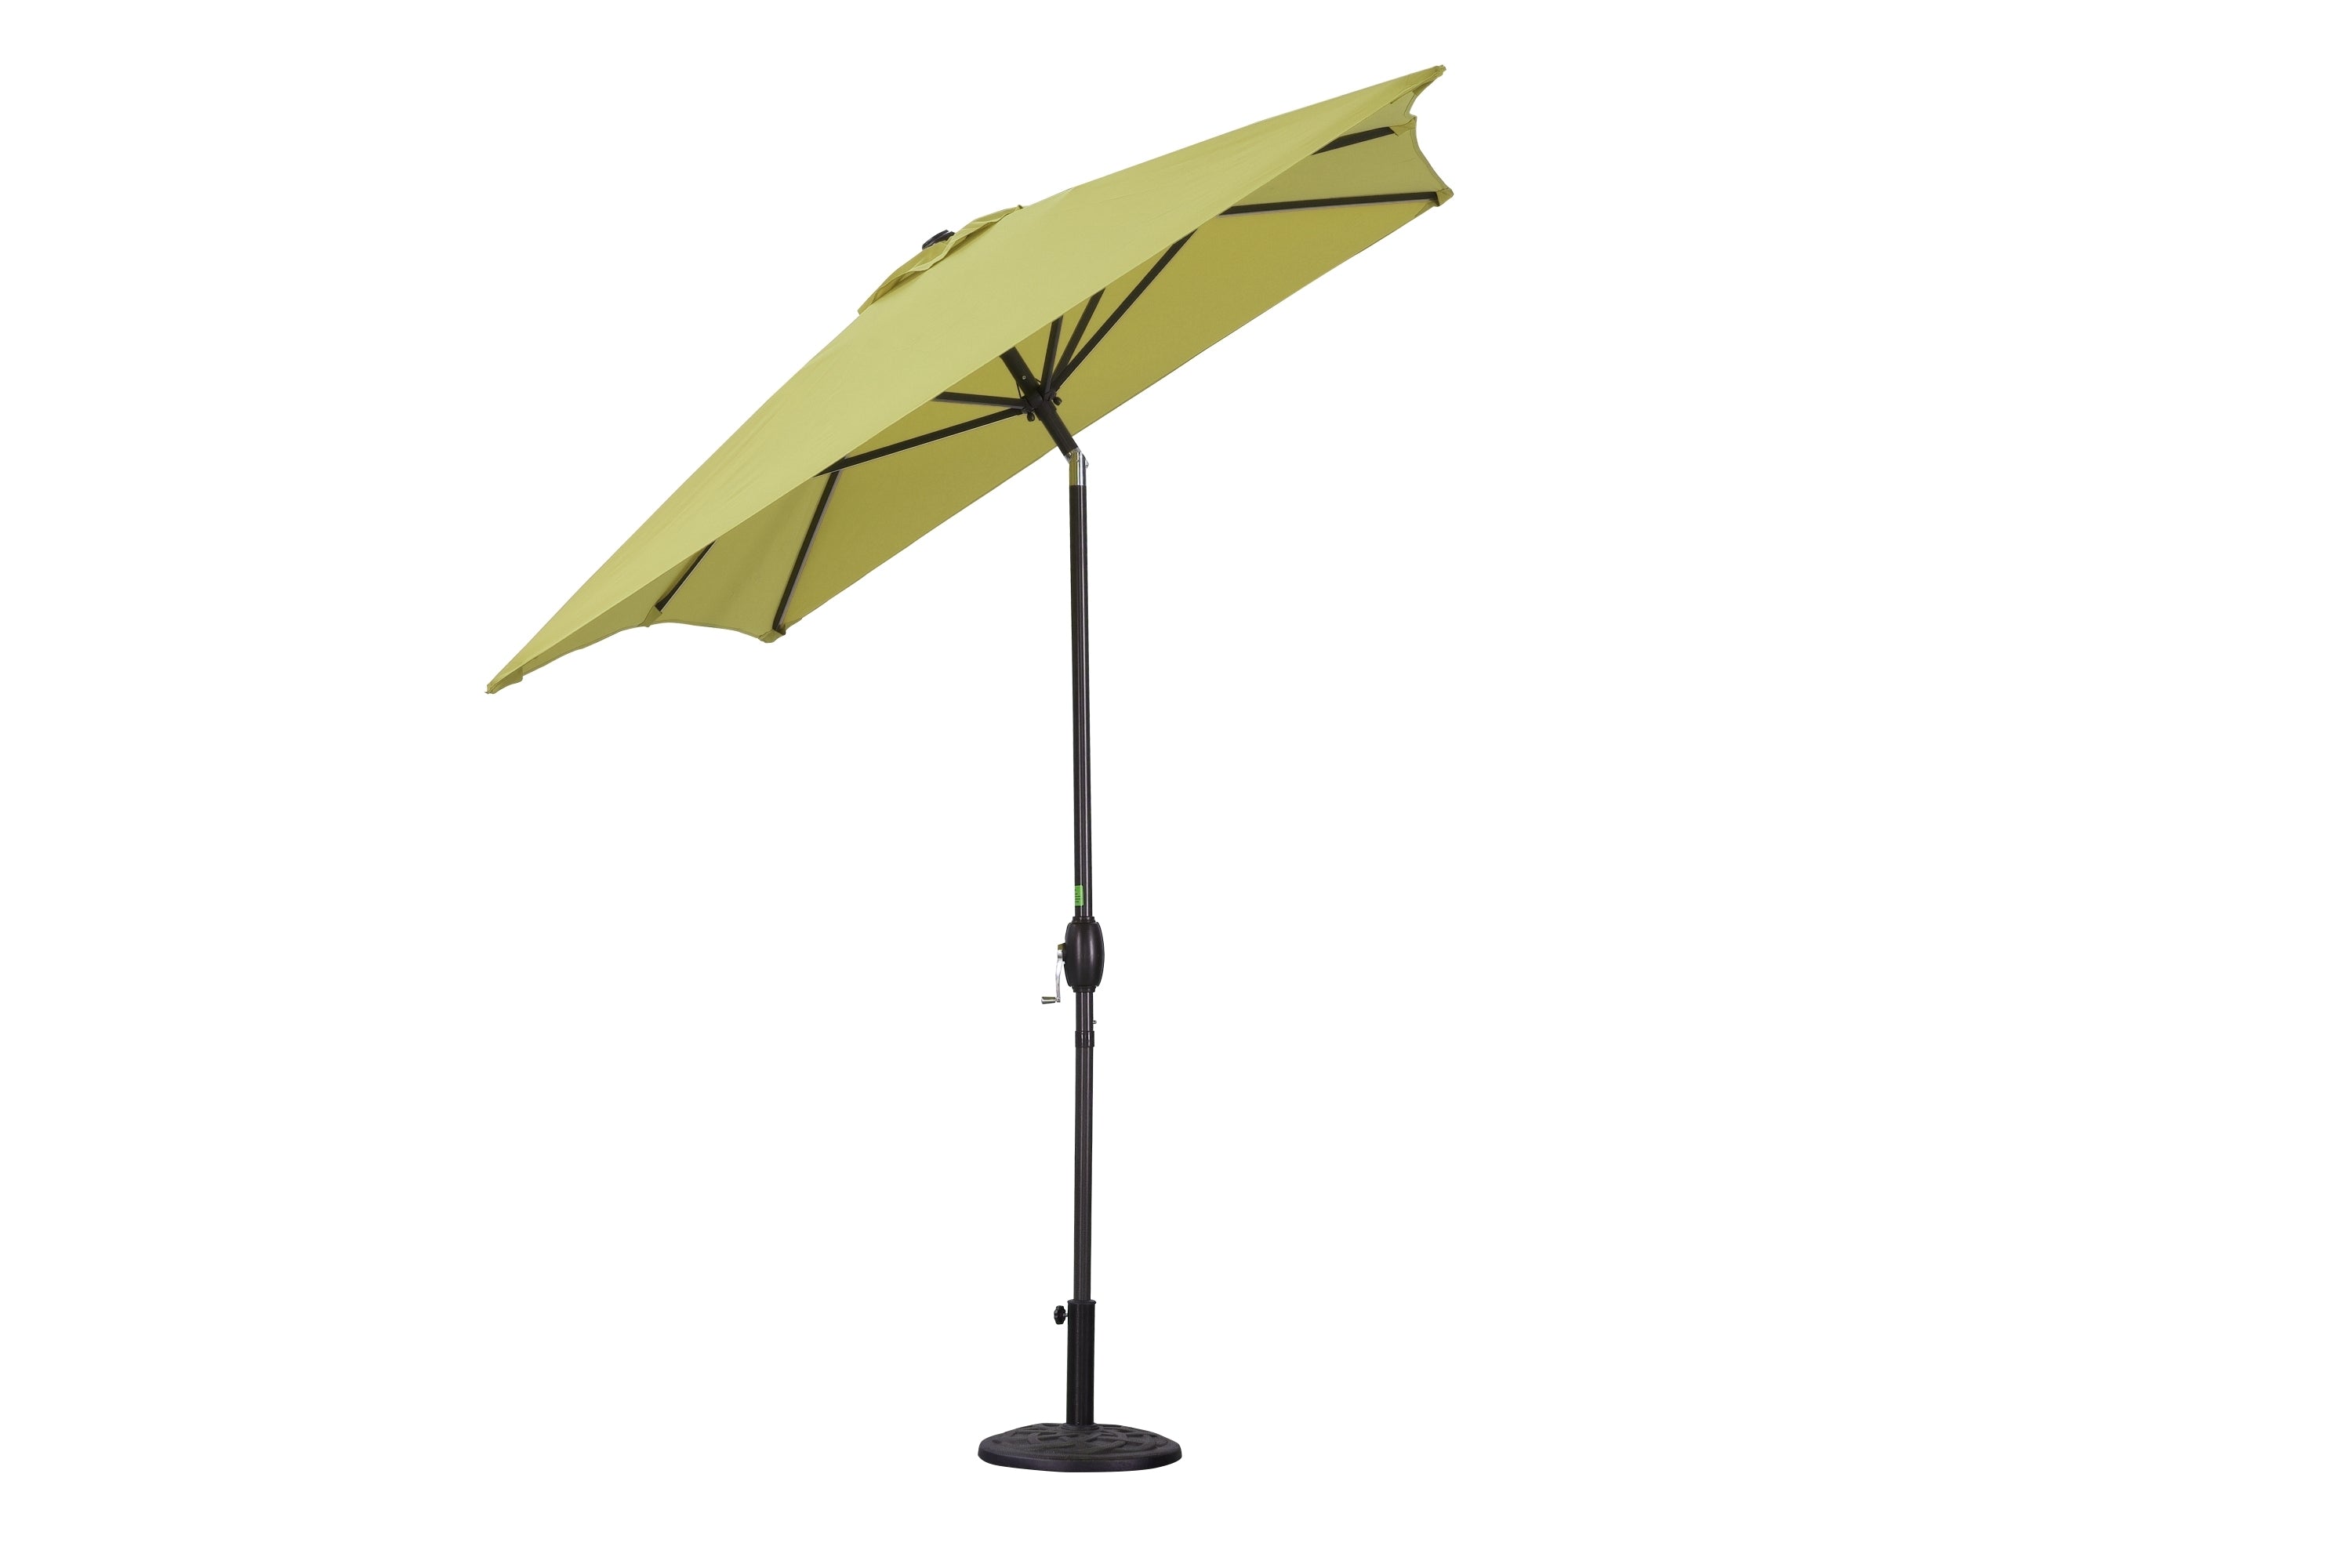 Rectangular-Patio-Umbrella-6.5-ft.-x-10-ft.-with-Tilt,-Crank-and-6-Sturdy-Ribs-for-Deck,-Lawn,-Pool-in-LIME-GREEN-Umbrellas-&-Sunshades